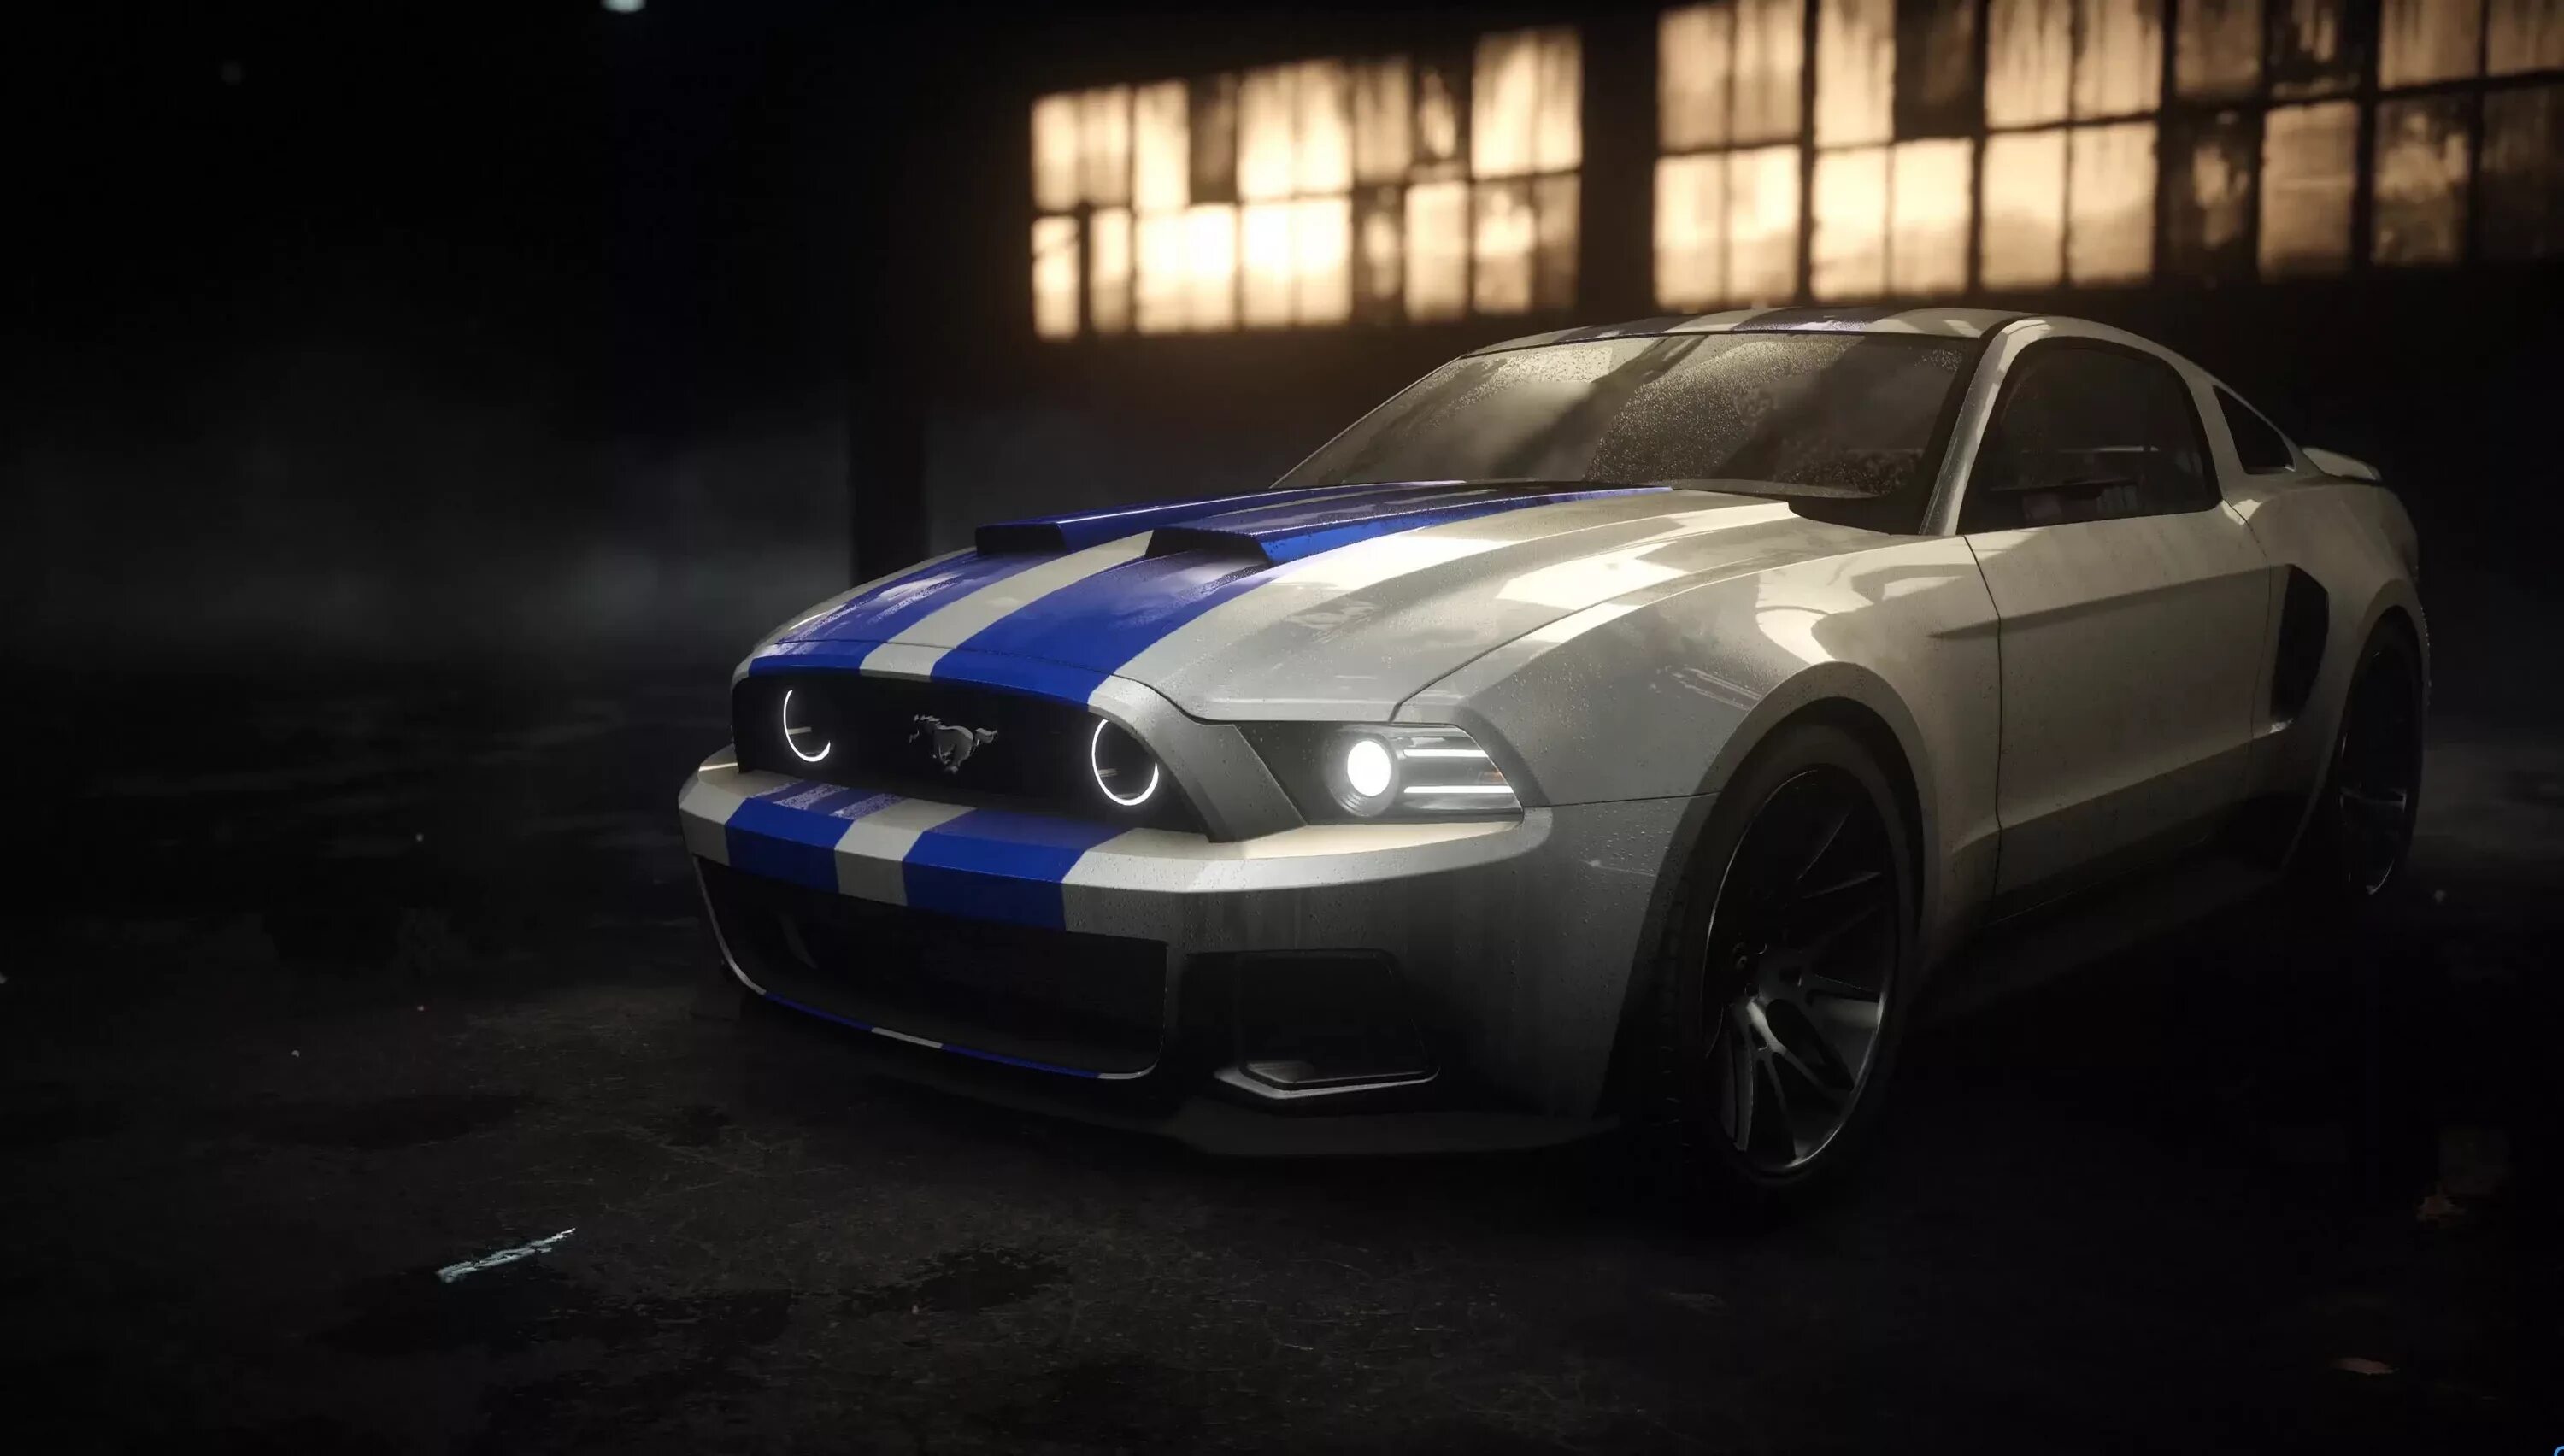 Need for speed мустанг. Ford Mustang Shelby gt500 NFS Edition. Ford Mustang gt 500 NFS Rivals. Ford Mustang gt 2015 NFS 2015. NFS 2015 Ford Mustang gt.